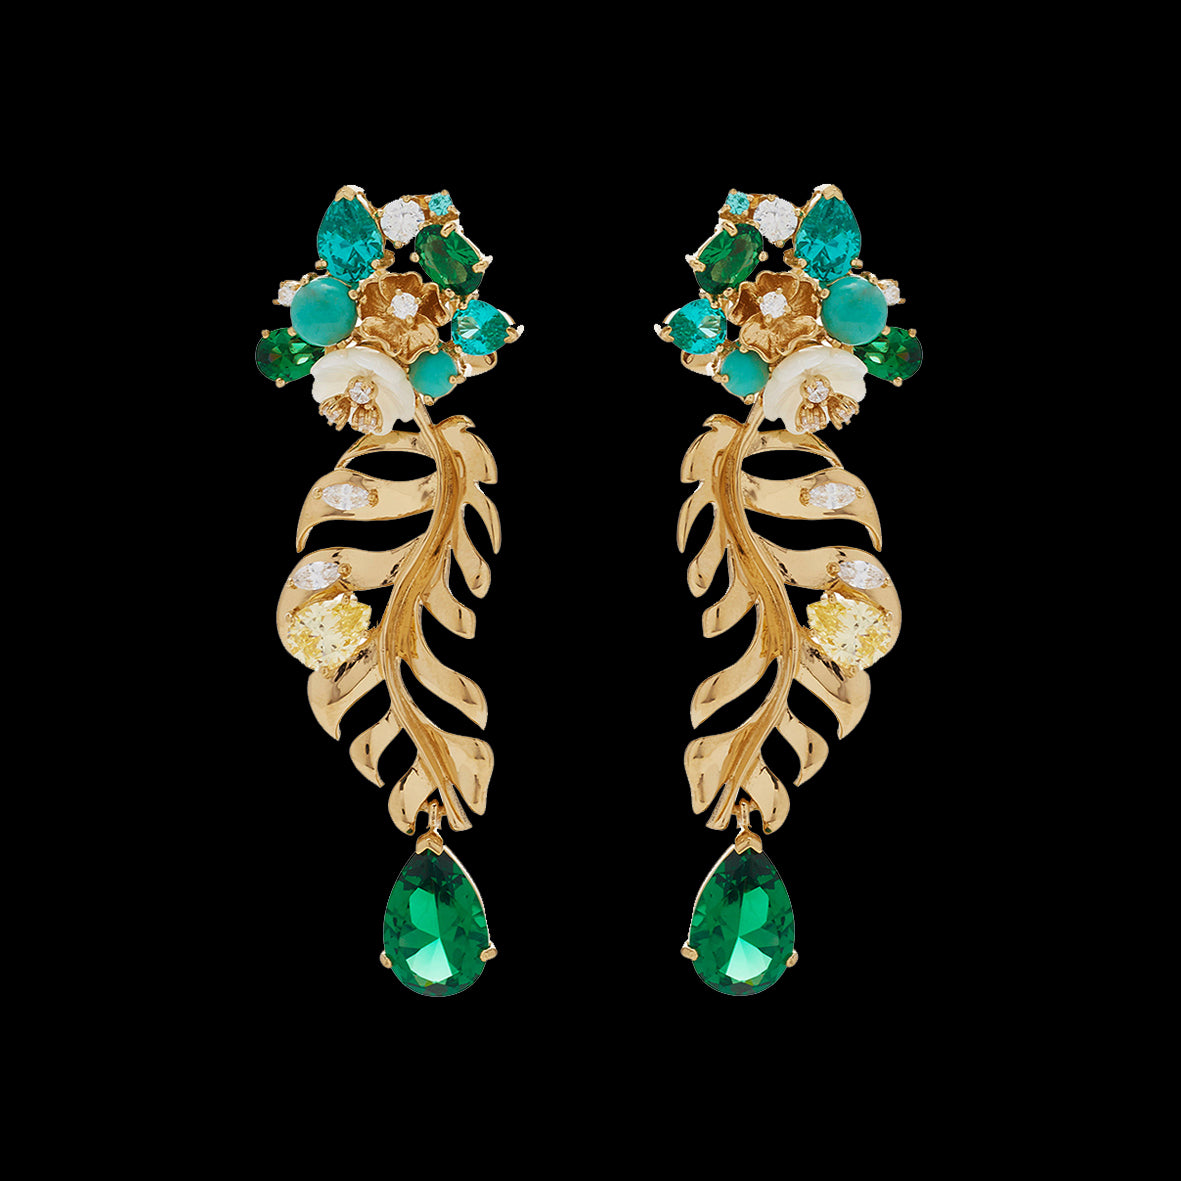 Emerald Palm Earrings, Earring, Anabela Chan Joaillerie - Fine jewelry with laboratory grown and created gemstones hand-crafted in the United Kingdom. Anabela Chan Joaillerie is the first fine jewellery brand in the world to champion laboratory-grown and created gemstones with high jewellery design, artisanal craftsmanship and a focus on ethical and sustainable innovations.